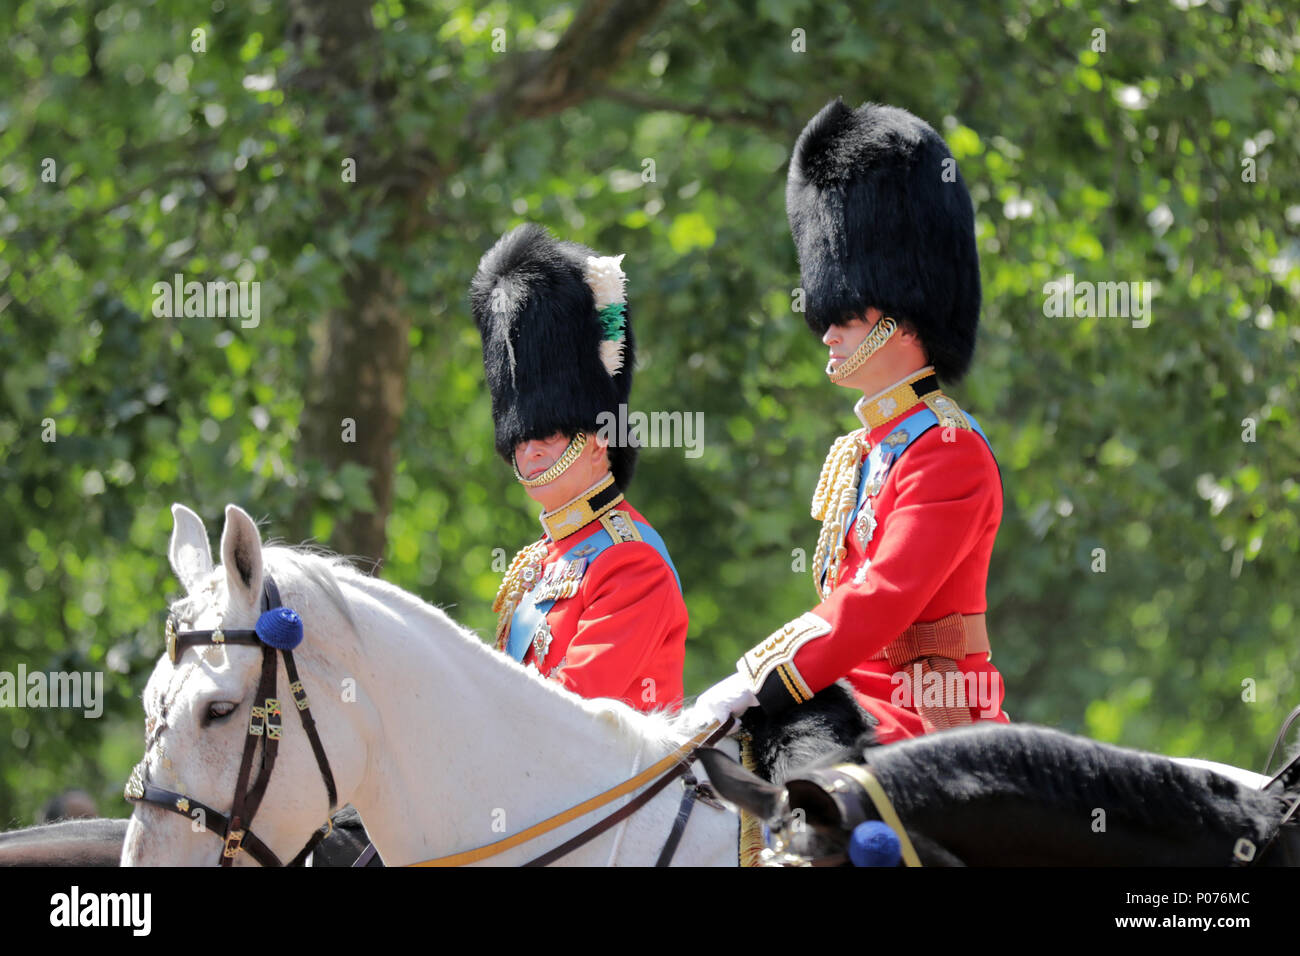 London, UK, 9 June 2018.  HRH Prince William, the Duke of Cambridge, on his horse, Wellesey, Trooping the Colour Credit: amanda rose/Alamy Live News Credit: amanda rose/Alamy Live News Stock Photo